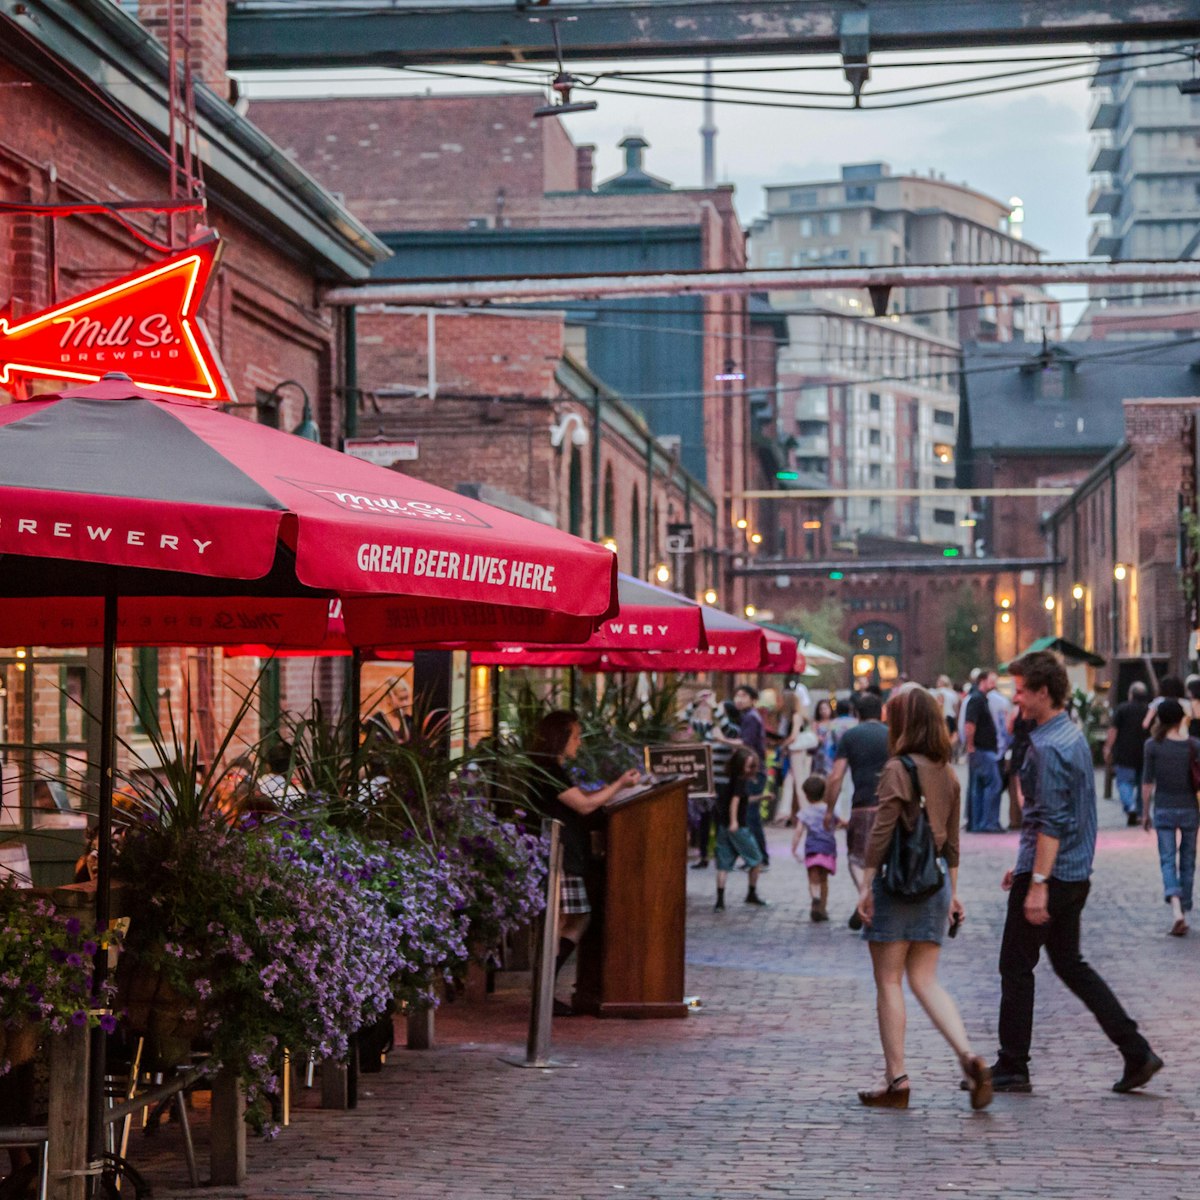 Toronto, Ontario, Canada - July 13, 2012:   The Distillery District, in Toronto, Ontario, is named after this area's history in distilling spirits.   After falling into a state of disrepair by the turn of the millennium, efforts began to redevelop the area and create a destination for locals and tourists alike.  The old brick Victorian structures were converted into retail, commercial and residential space.  Many galleries, bars, restaurants and cafes line the area.  It hosts various cultural events and has become a 'must see' district for those visiting Toronto...This photo shows a summer scene where district restaurants and bars have patio's set up allowing patrons to sit outdoors and enjoy a night out eating and people watching.   The roads here are for pedestrians only.